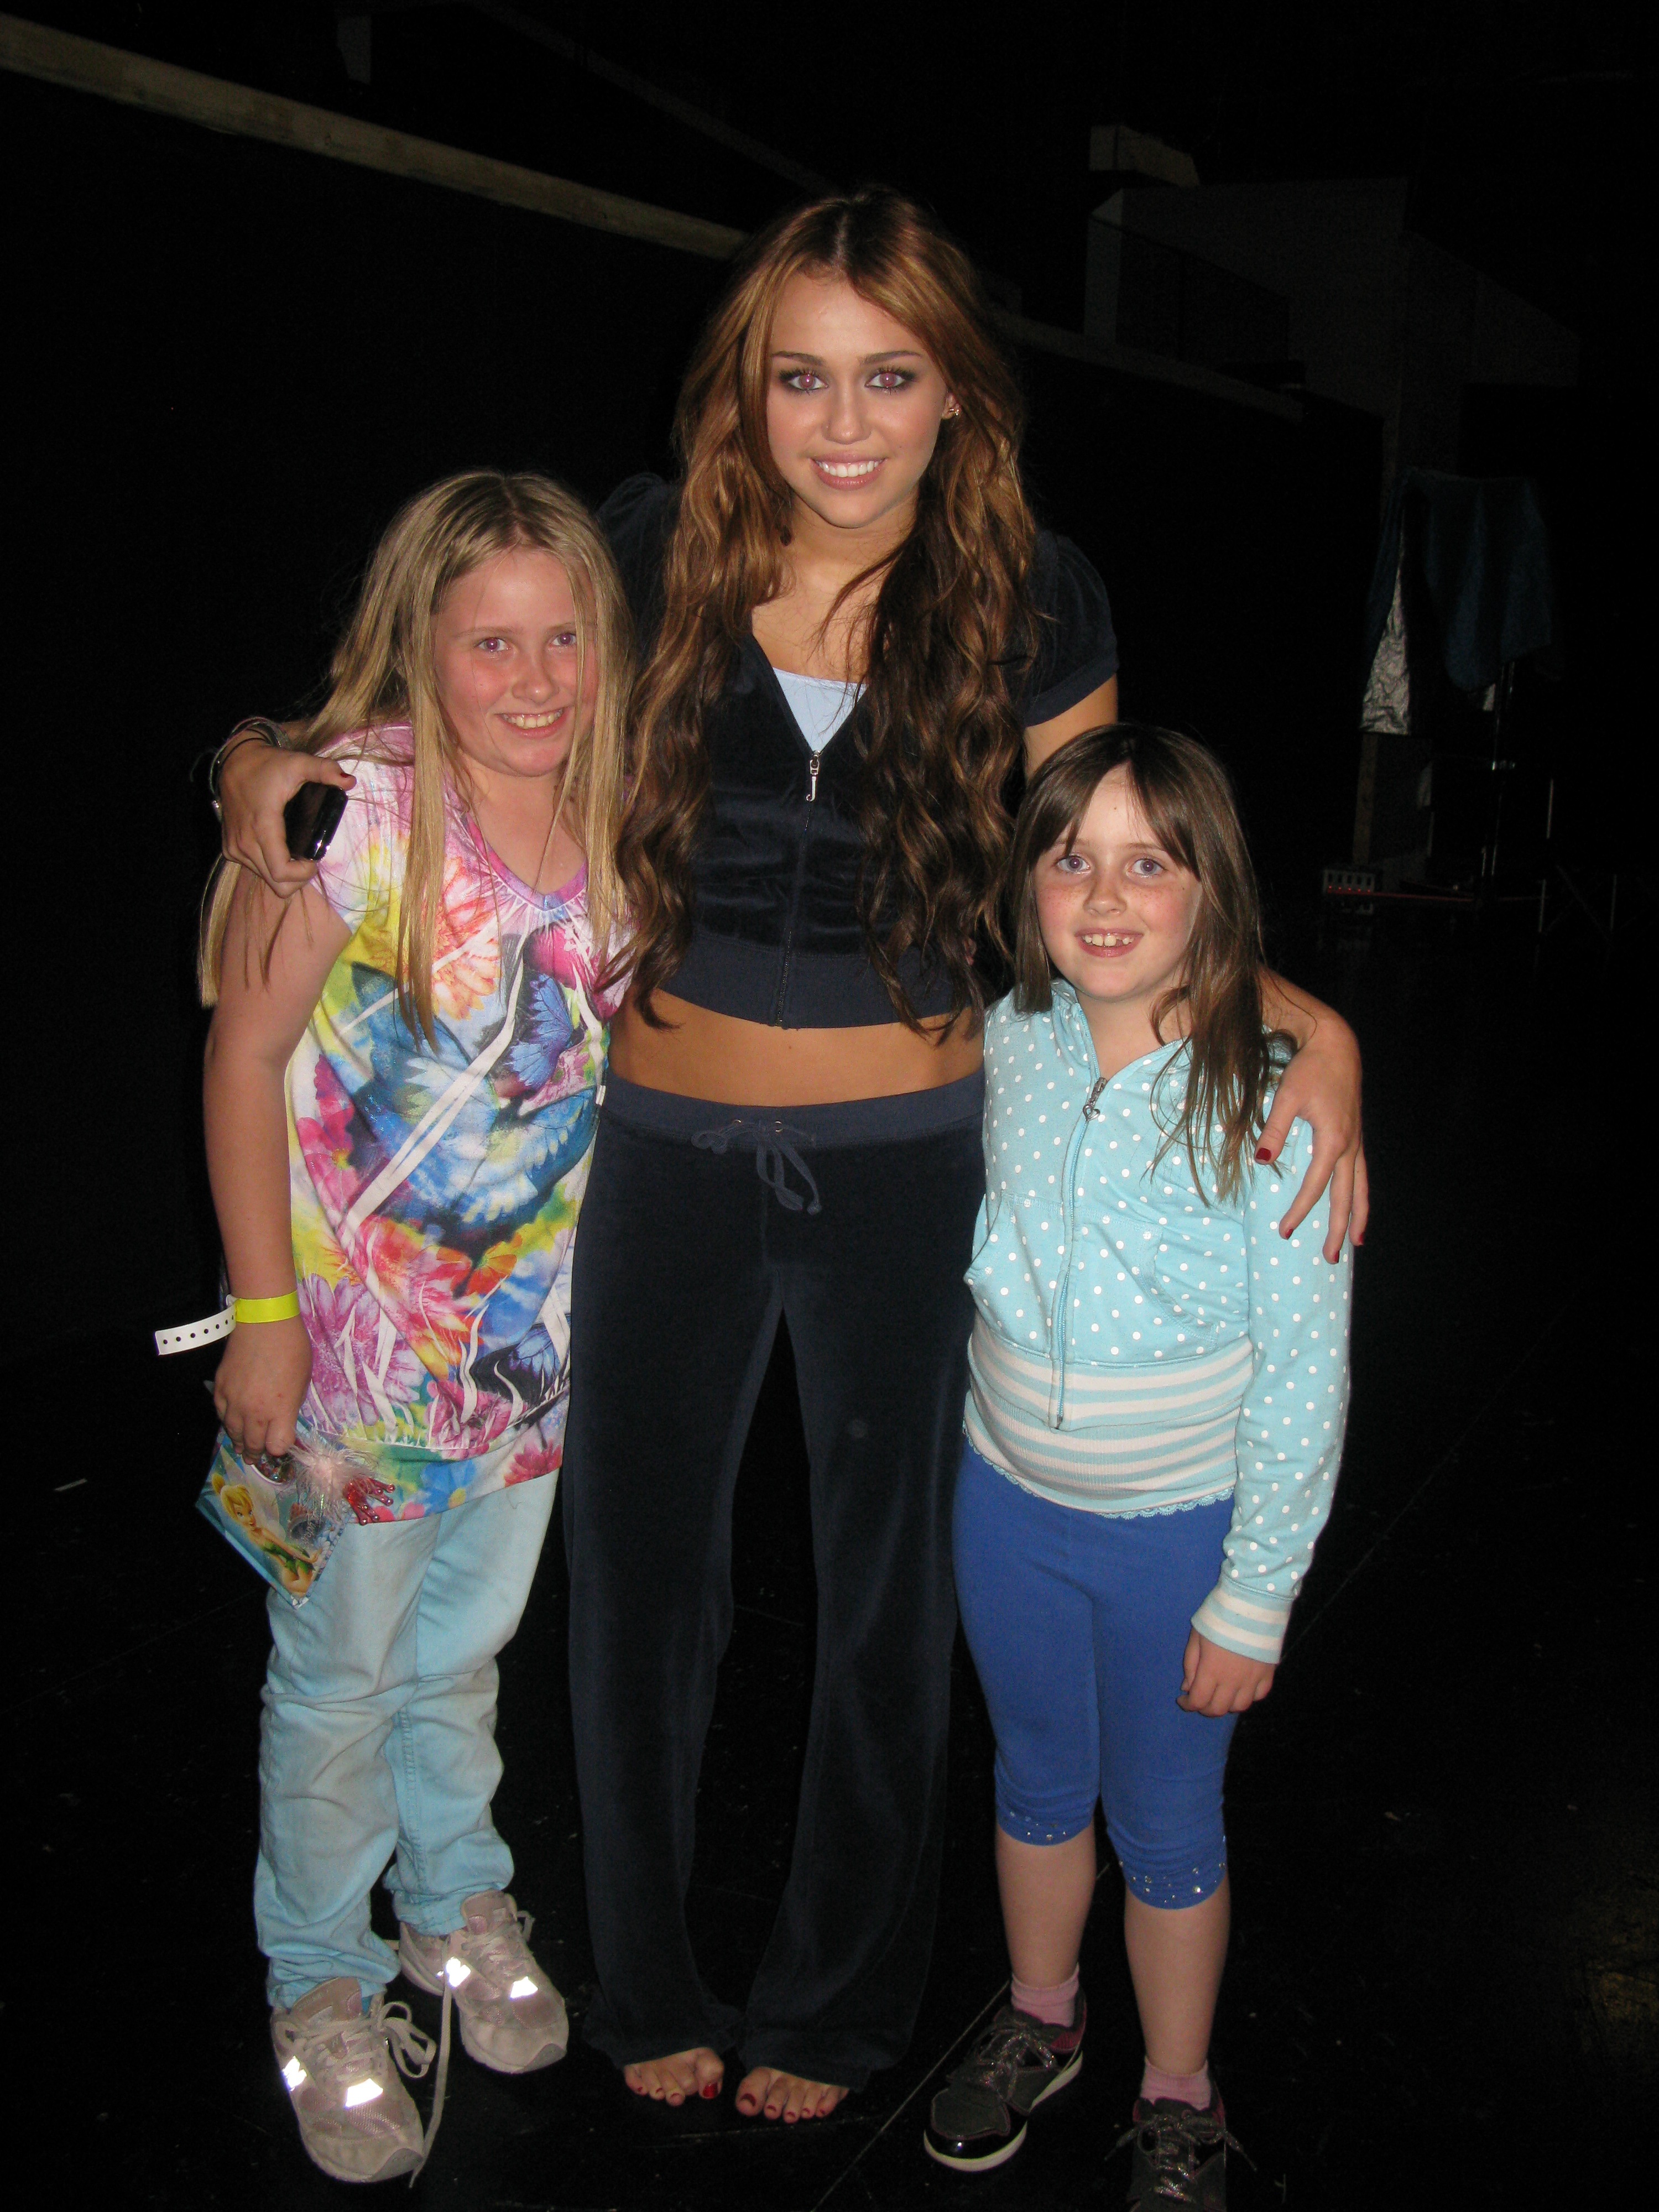 Kaitlin, Madeleine and Miley Cyrus